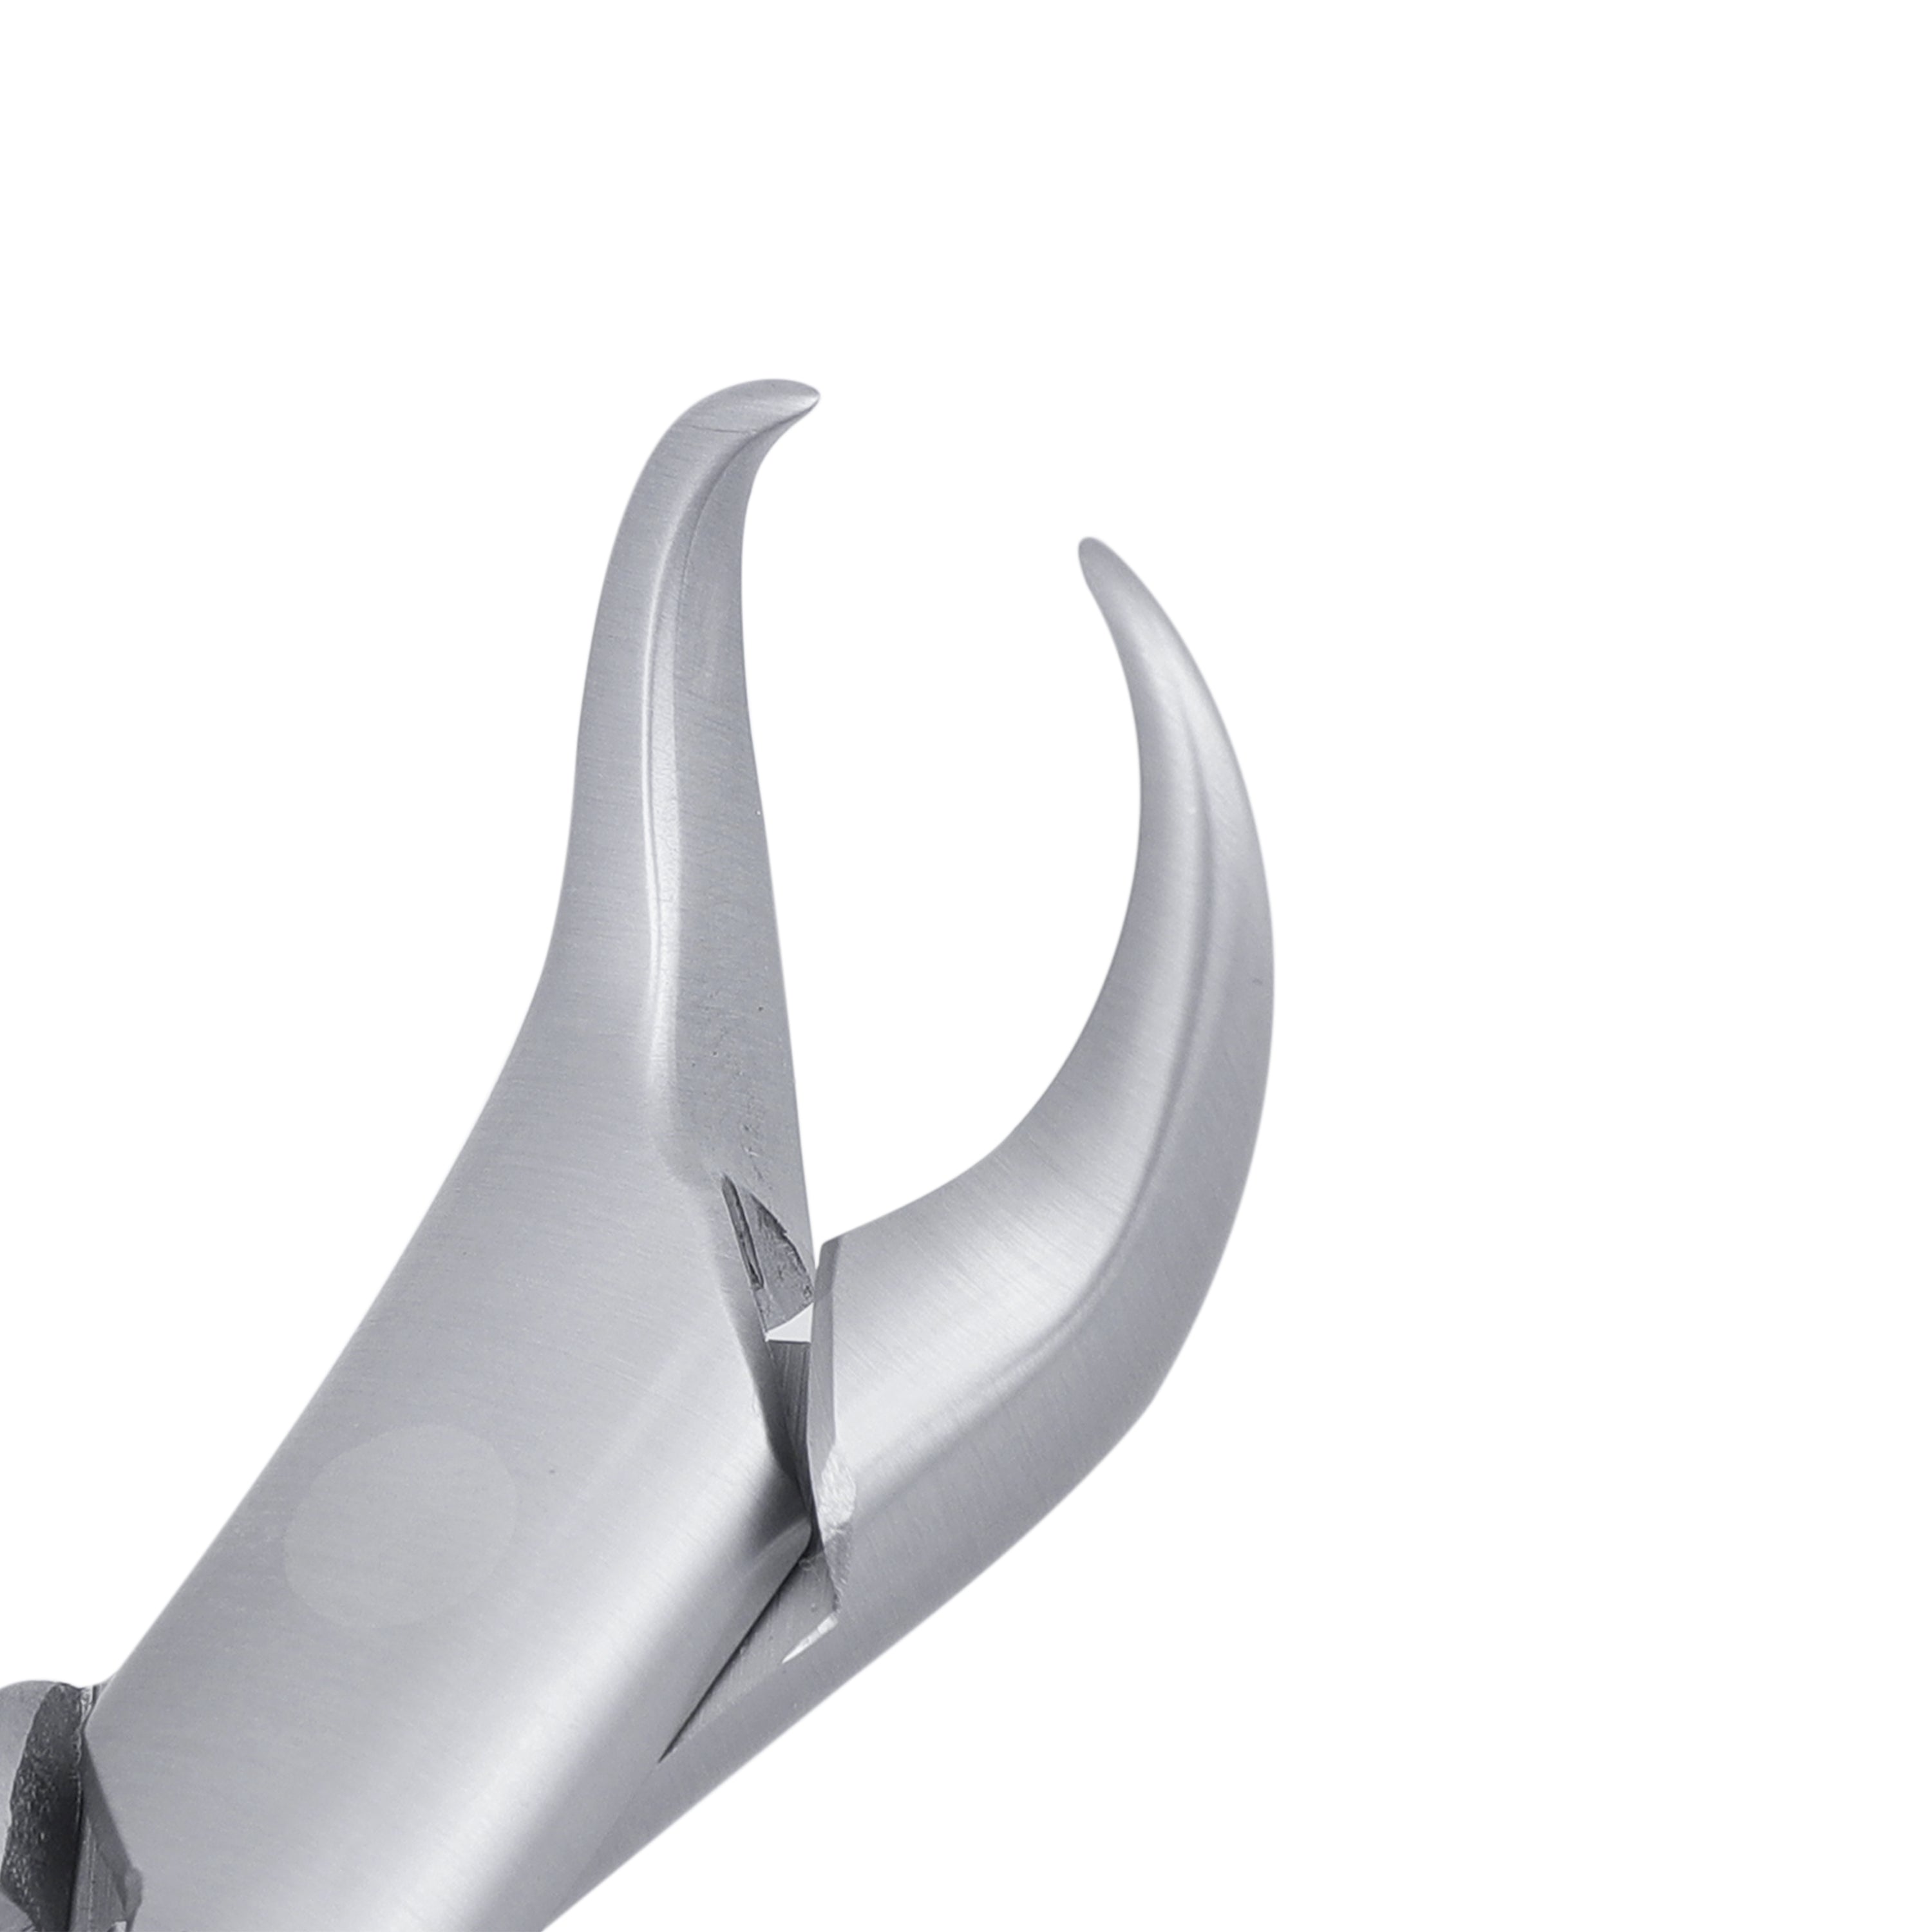 23S Pedo Cowhorn 1st & 2nd Lower Molars Extraction Forcep - HiTeck Medical Instruments